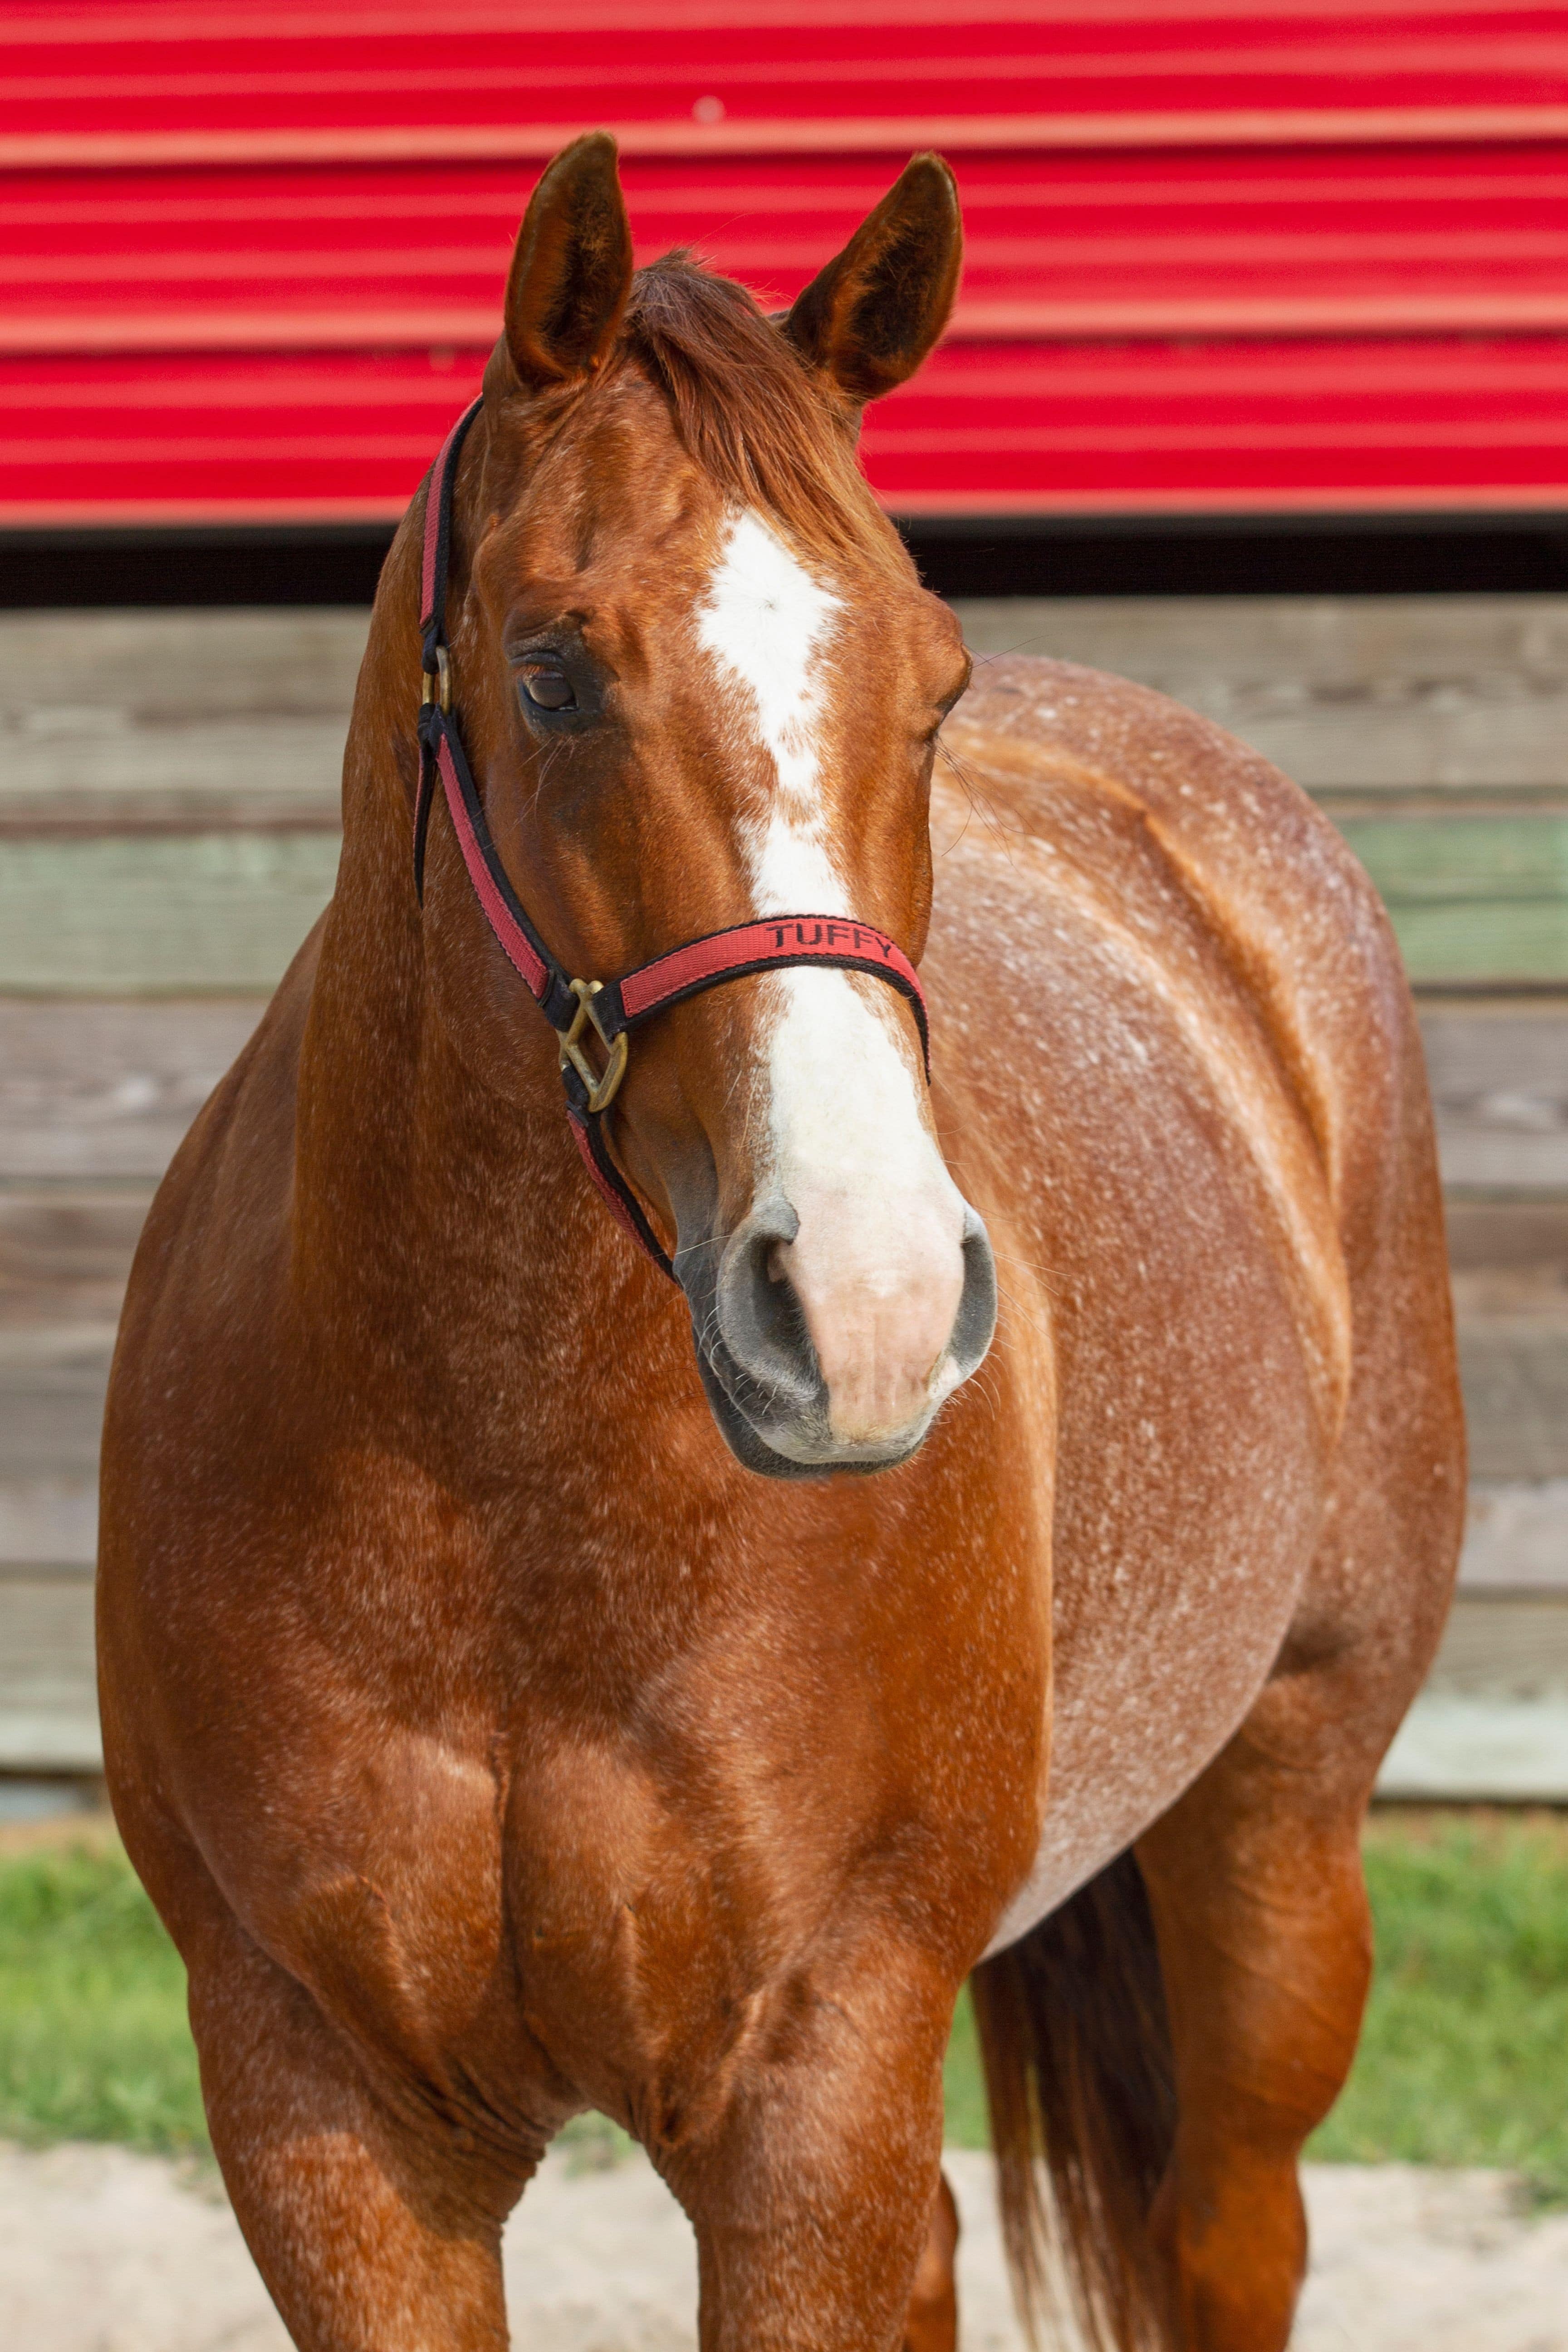 Tuffy is a Western lesson horse at J & S Performance Horses. He is a red roan gelding with a blaze, wearing a red and black halter with his name on it.